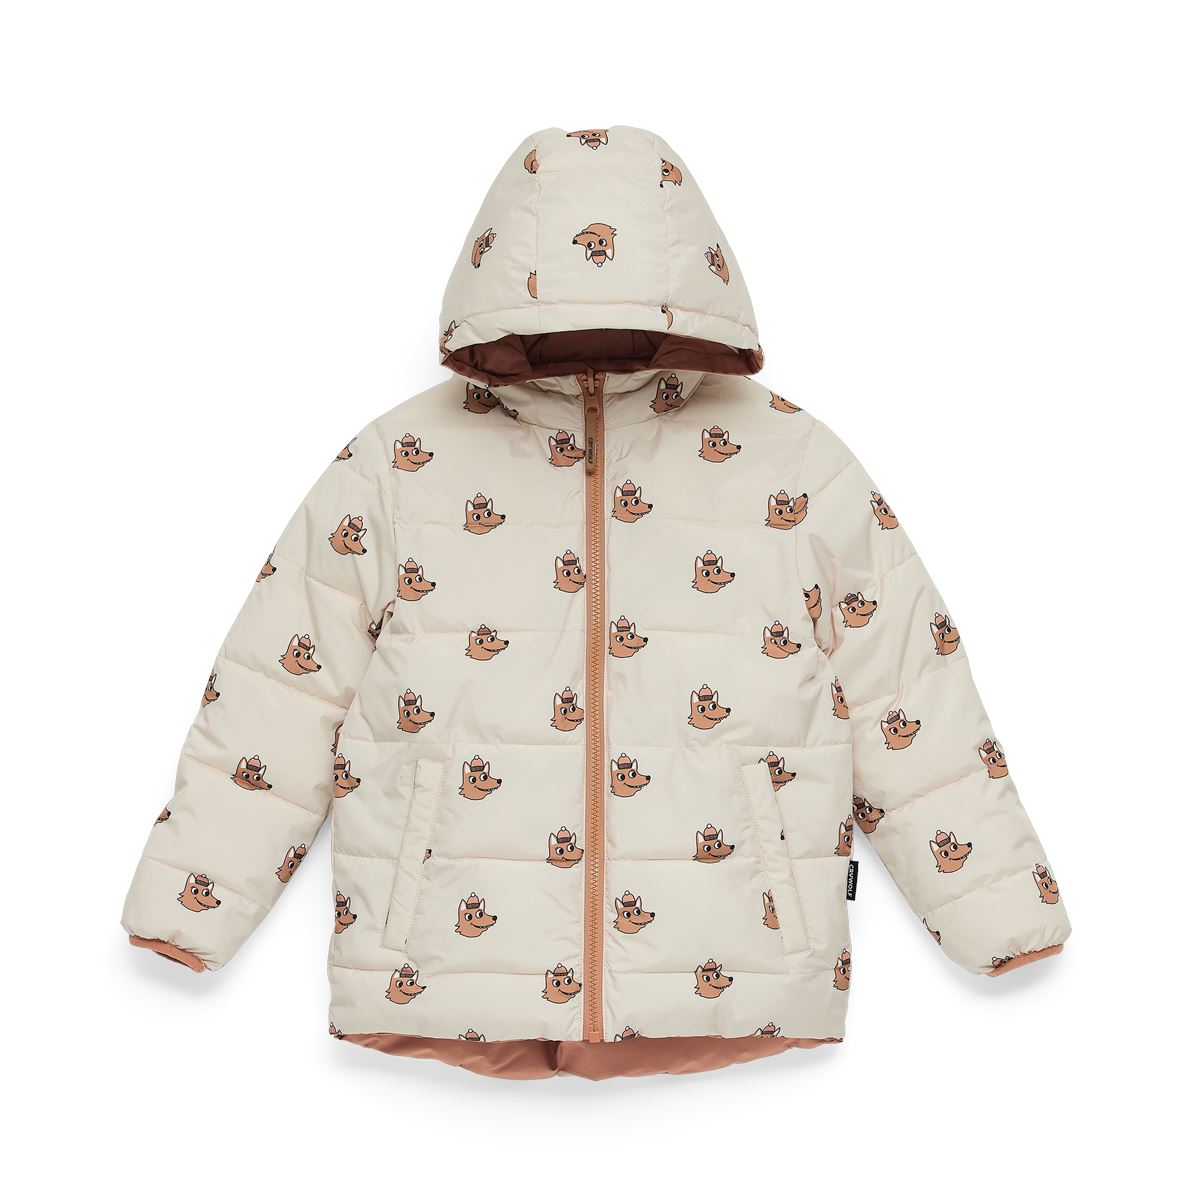 Crywolf Reversible Eco Puffer - Terracotta Wolf Jacket Crywolf 